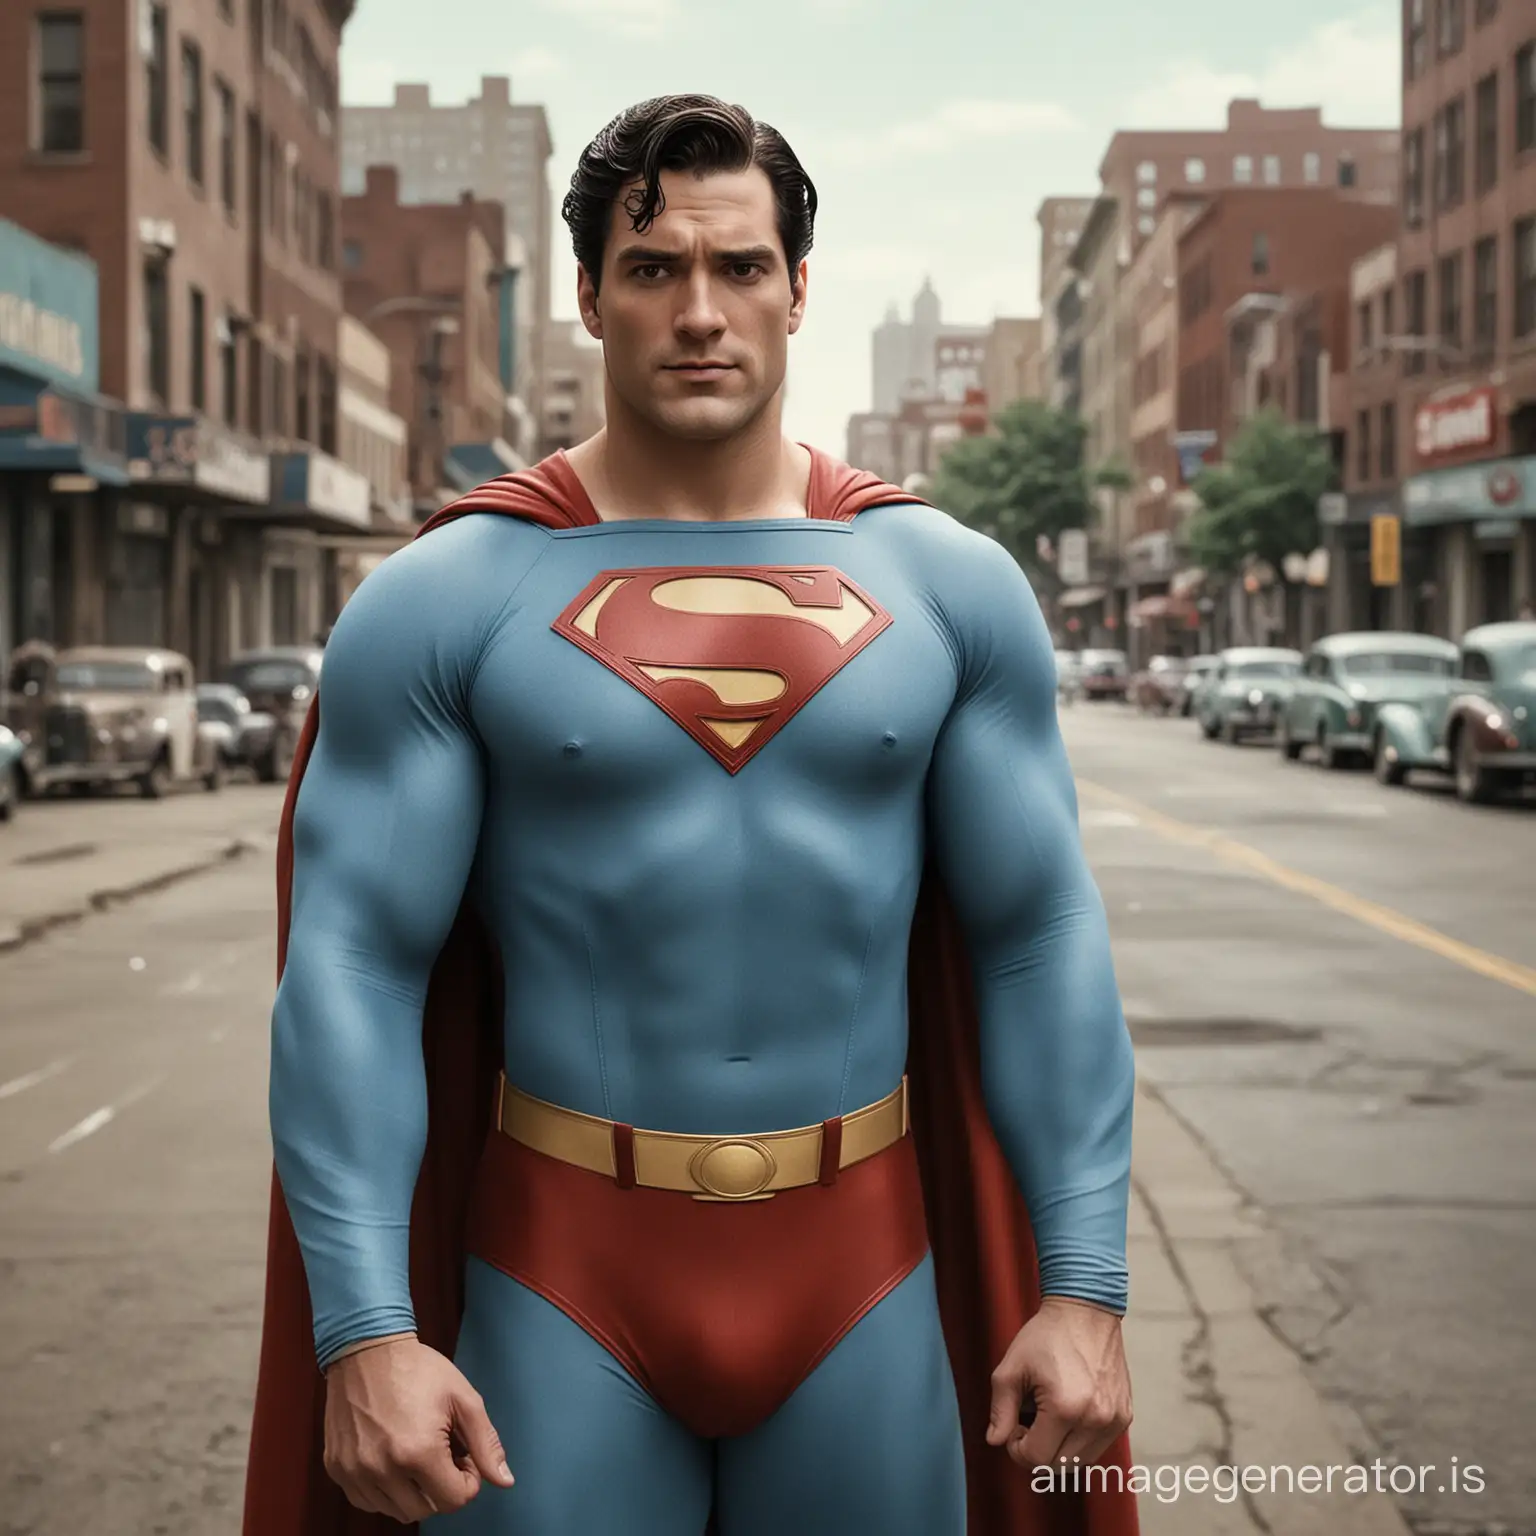 Superman-in-1930s-American-City-Realistic-Depiction-of-the-Iconic-Hero-in-Original-Comic-Style